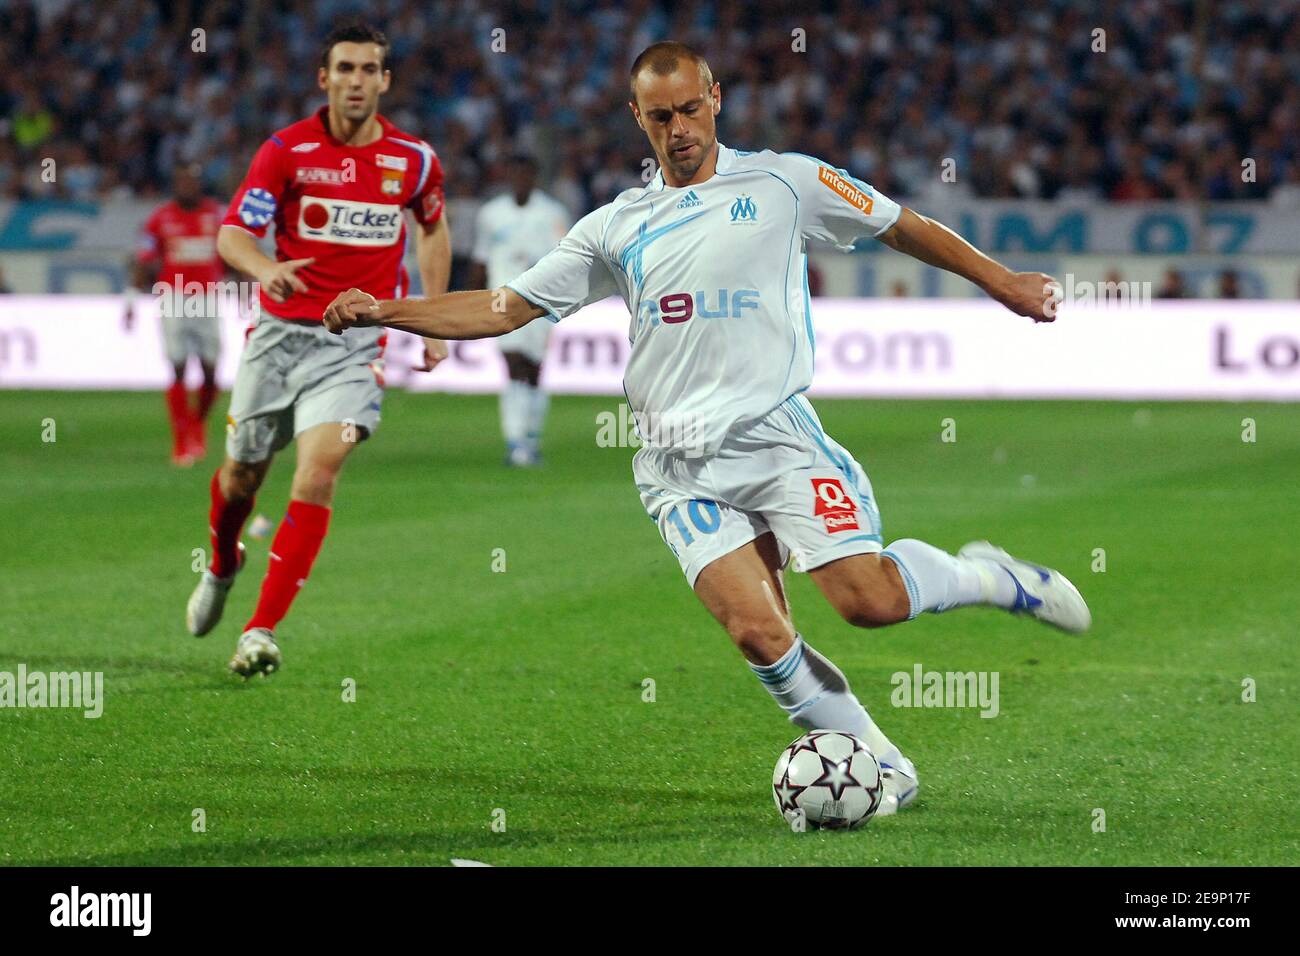 Marseille's Mickael Serge Pagis during the French first league football  match, Olympique de Marseille vs Olympique Lyonnais, at the Velodrome  stadium, in Marseille, France, on October 22, 2006. Lyon won 4-1. Photo